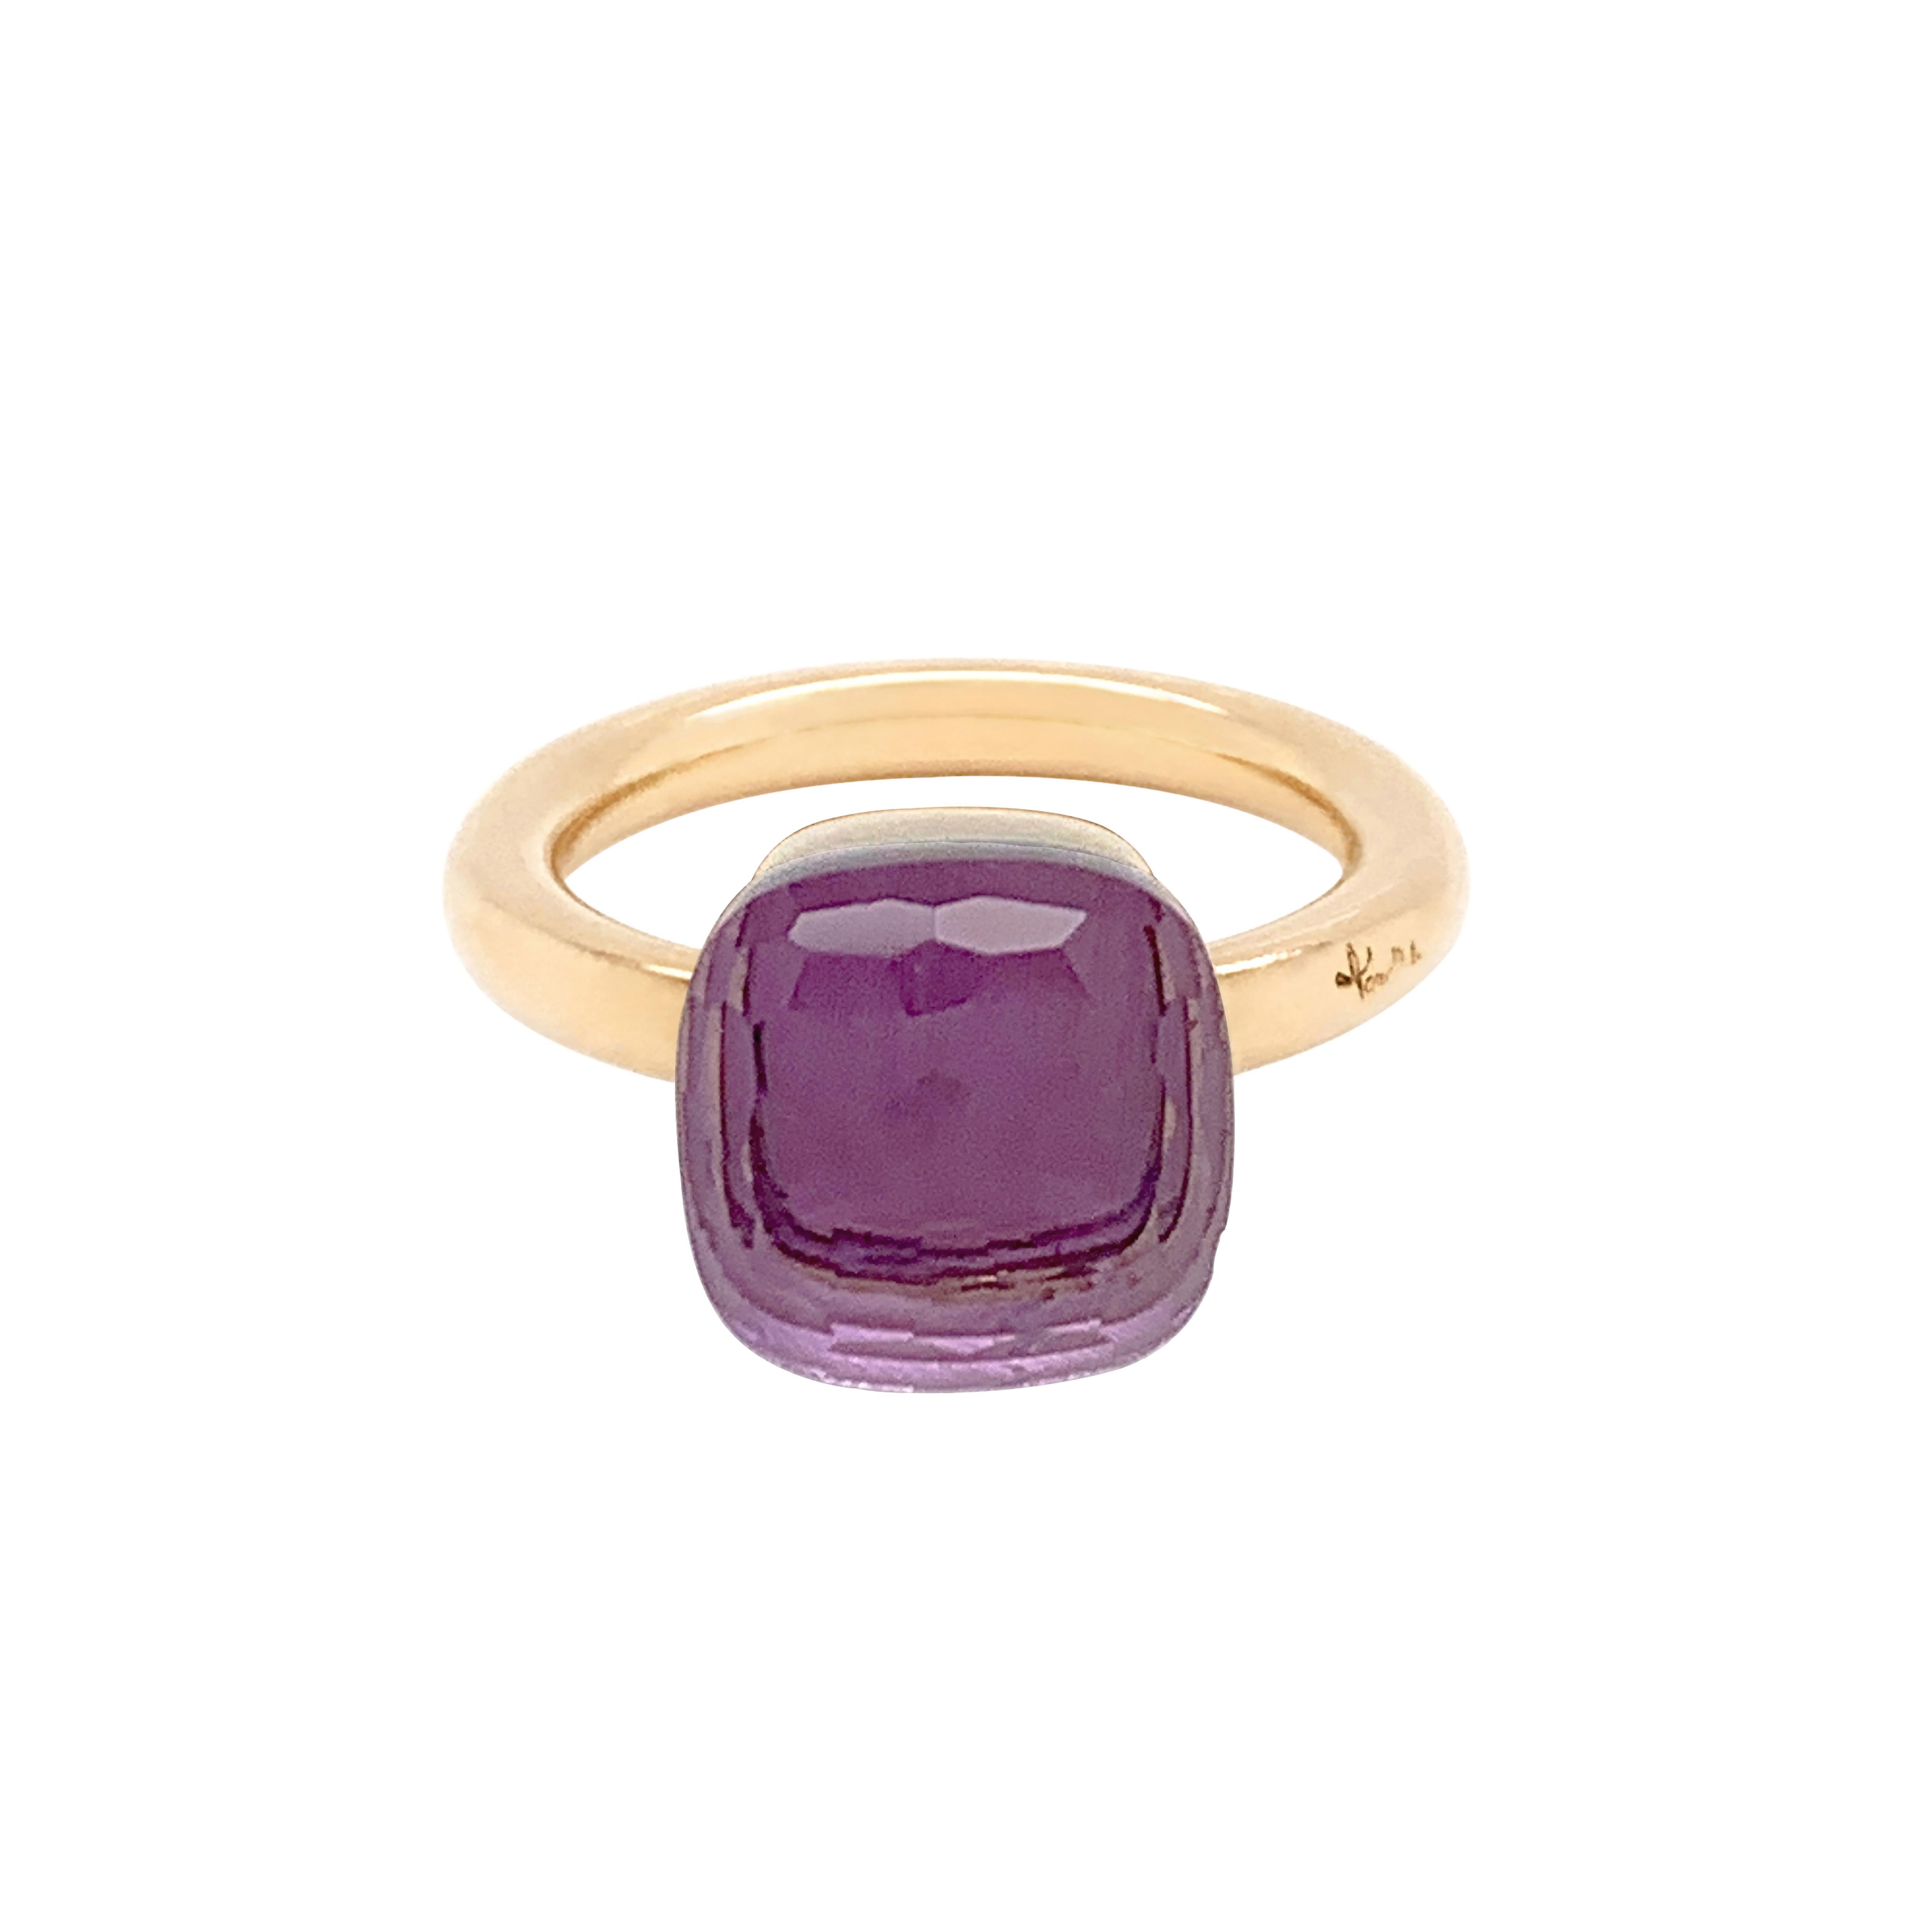 From the classic Pomellato 'Nudo' collection, a beautiful Rose De France amethyst measuring approximately 10mm x 10mm and weighs approximately 5.00 carat mounted in 18 carat rose gold. The ring features the classic Pomellato signature and hallmarks.